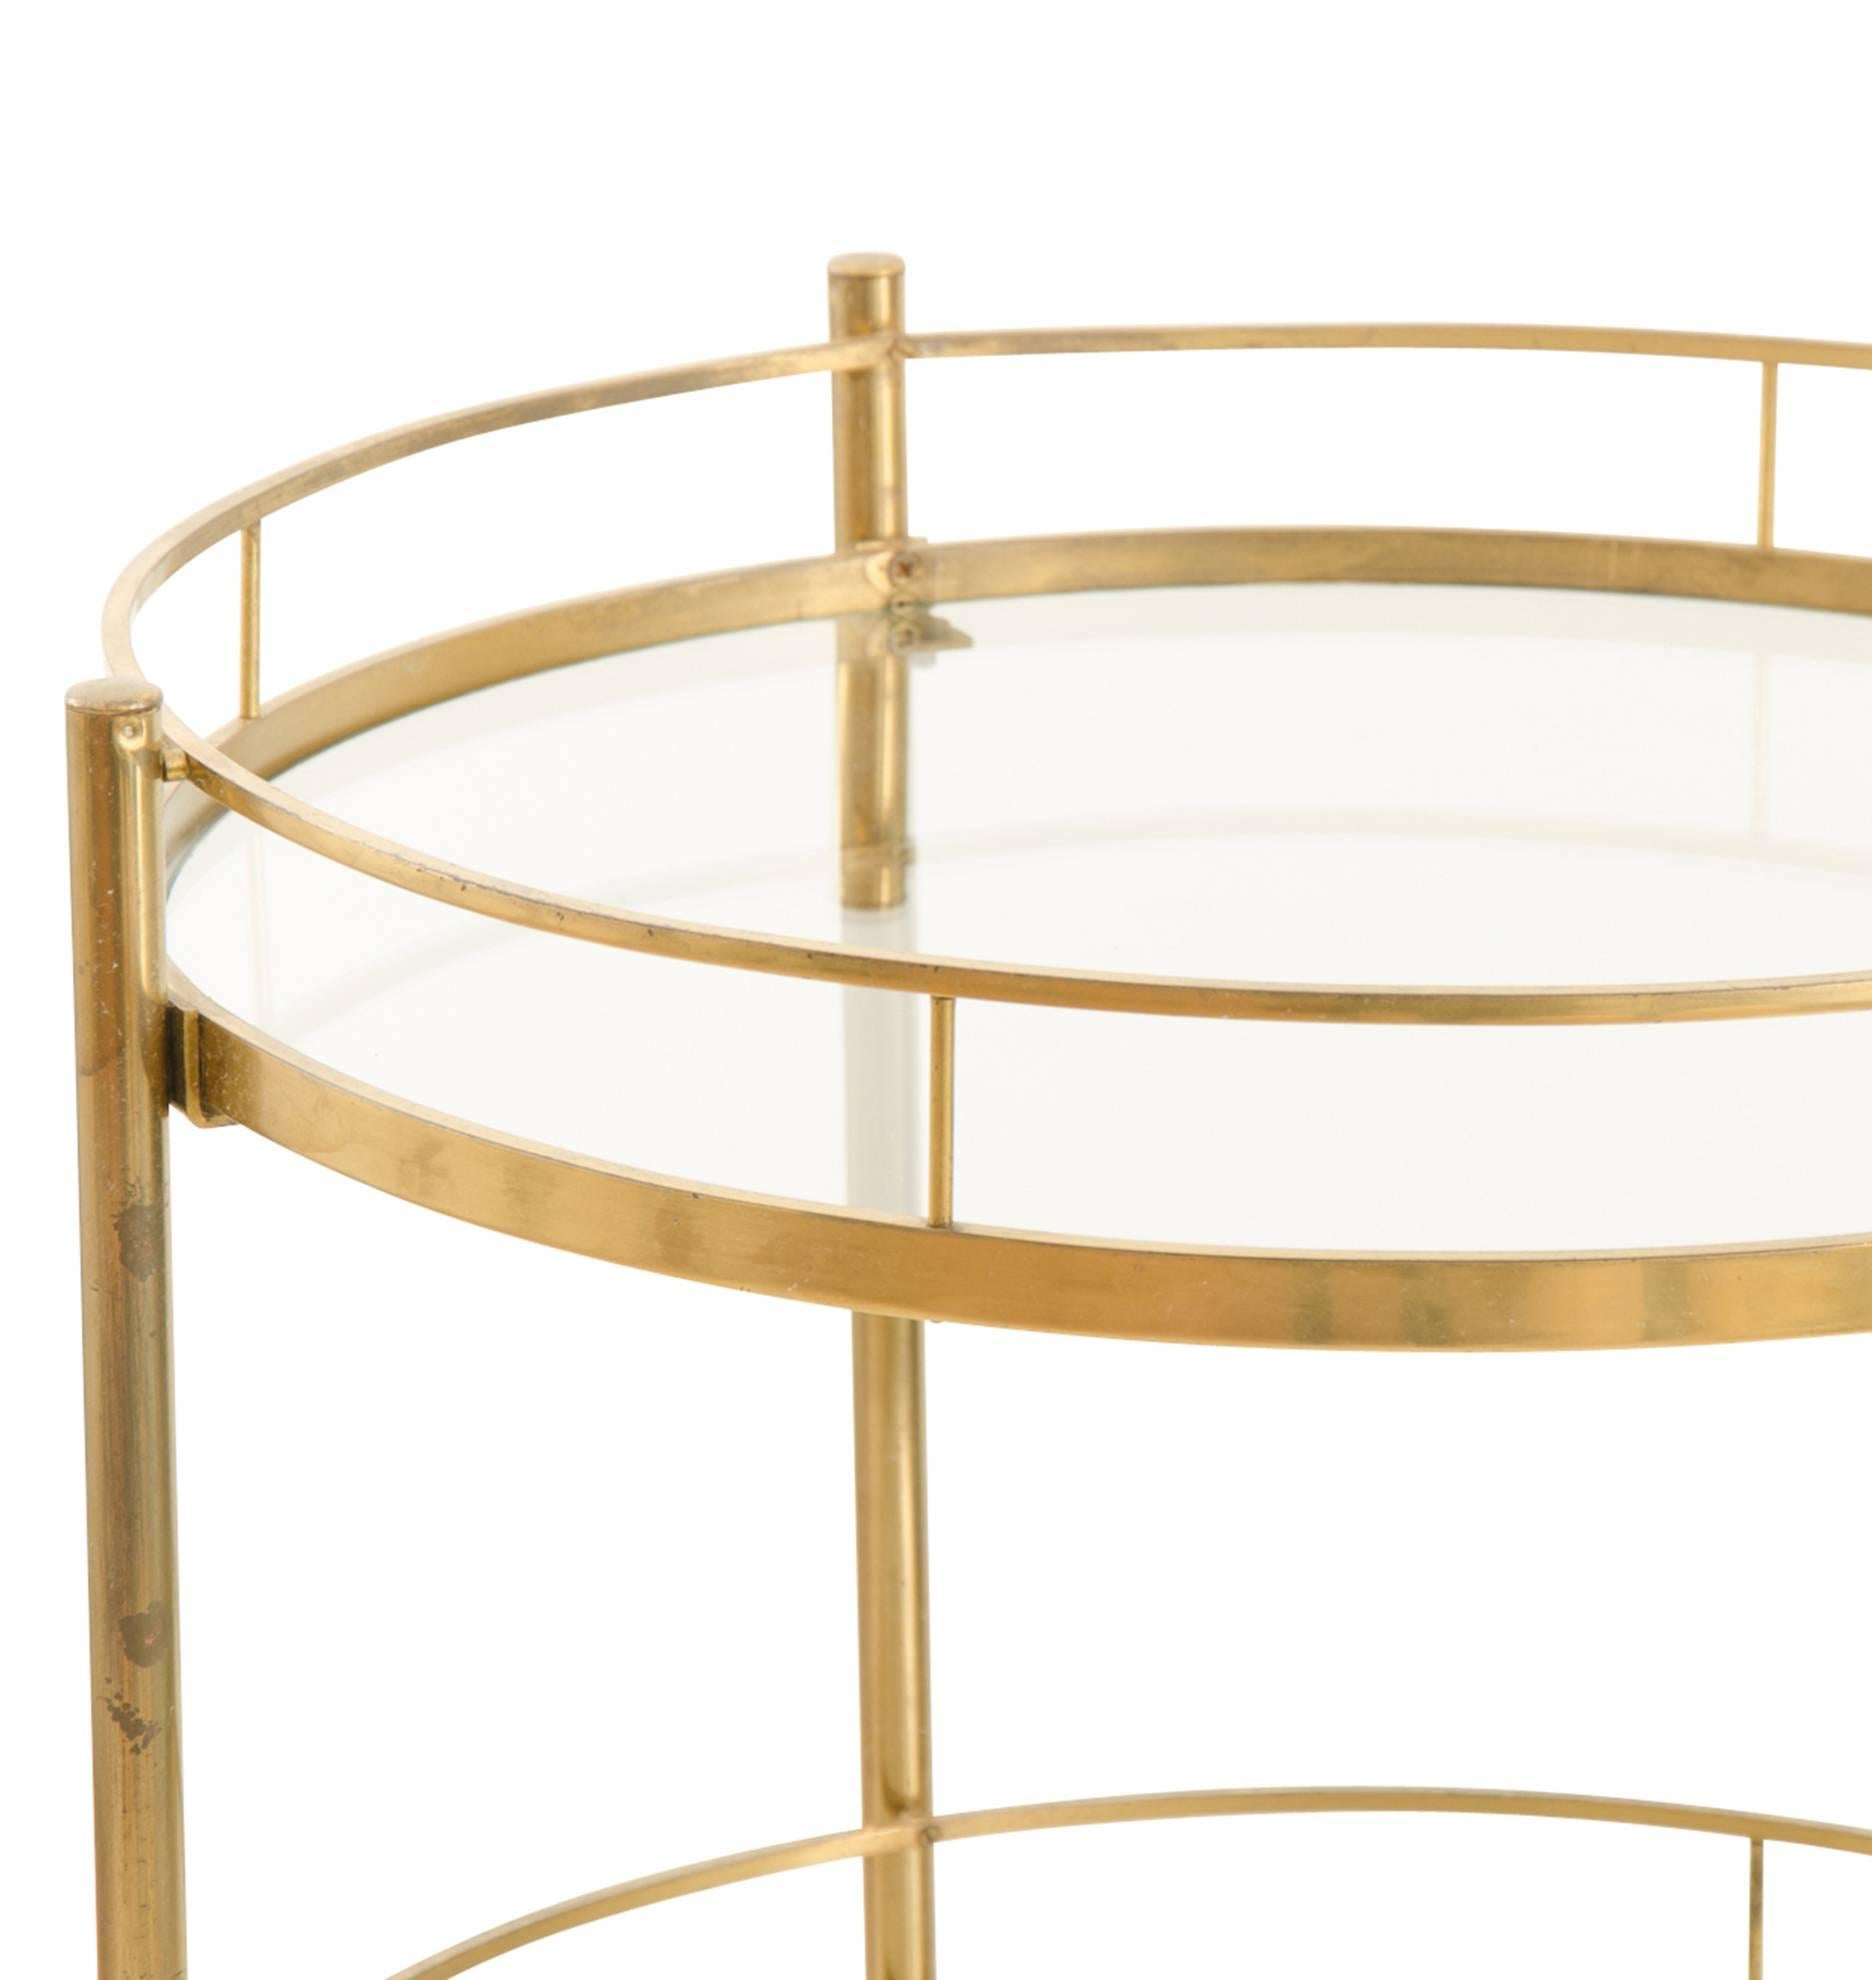 Classically Mid-Century with the period-favorite brass-toned finish, delicate composition and symmetrical styling. The three levels make this otherwise space-conscious bar cart a helpful piece.